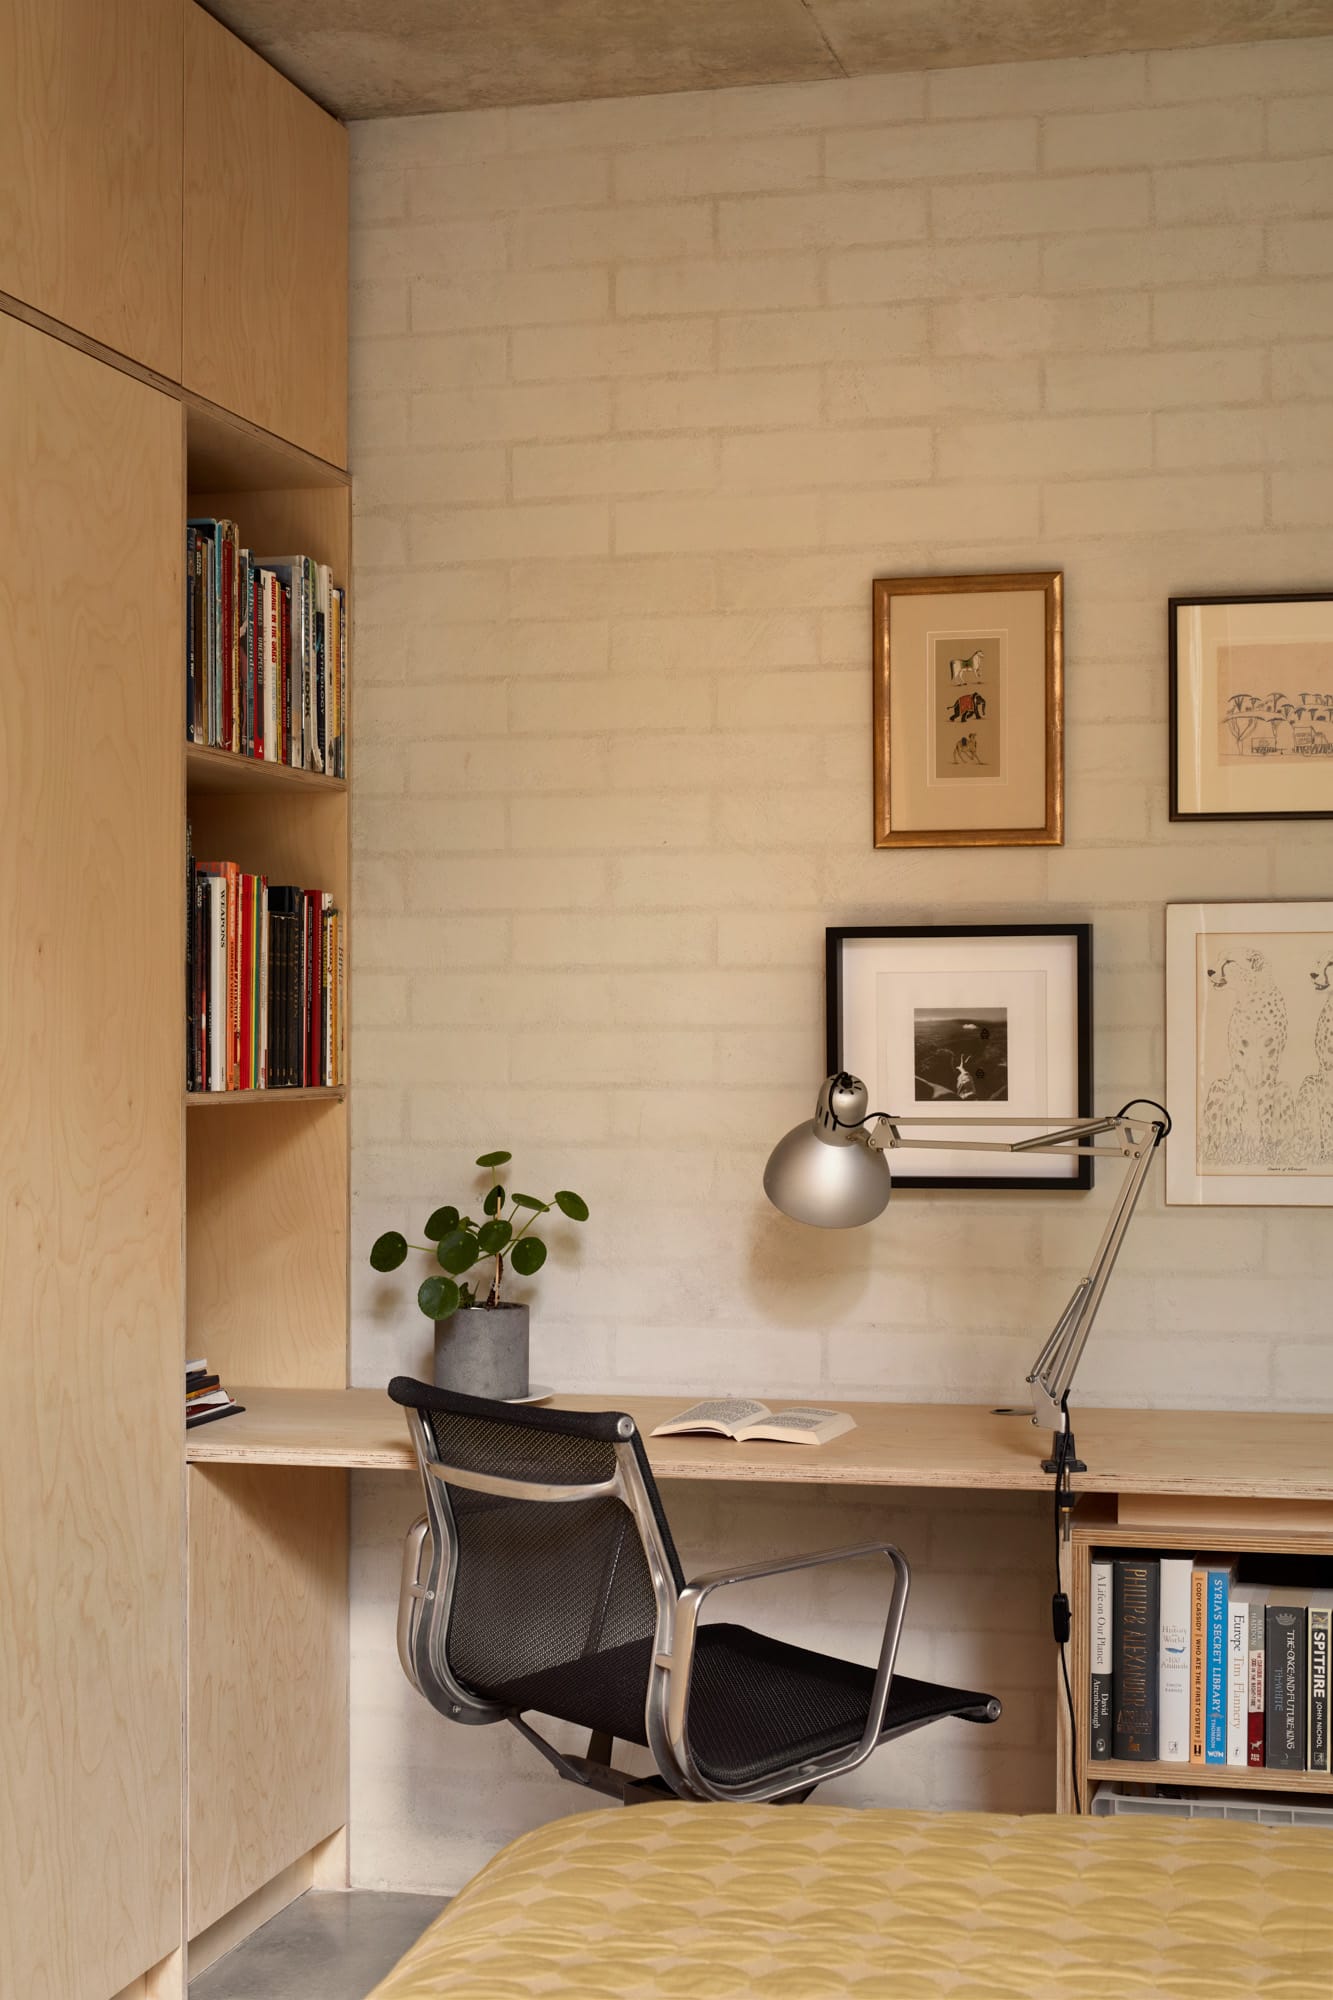 Brick House by Studio Roam. Photography by Jack Lovel. Study space with plywood desk and shelving to left. White brick wall. Black and chrome desk chair. 